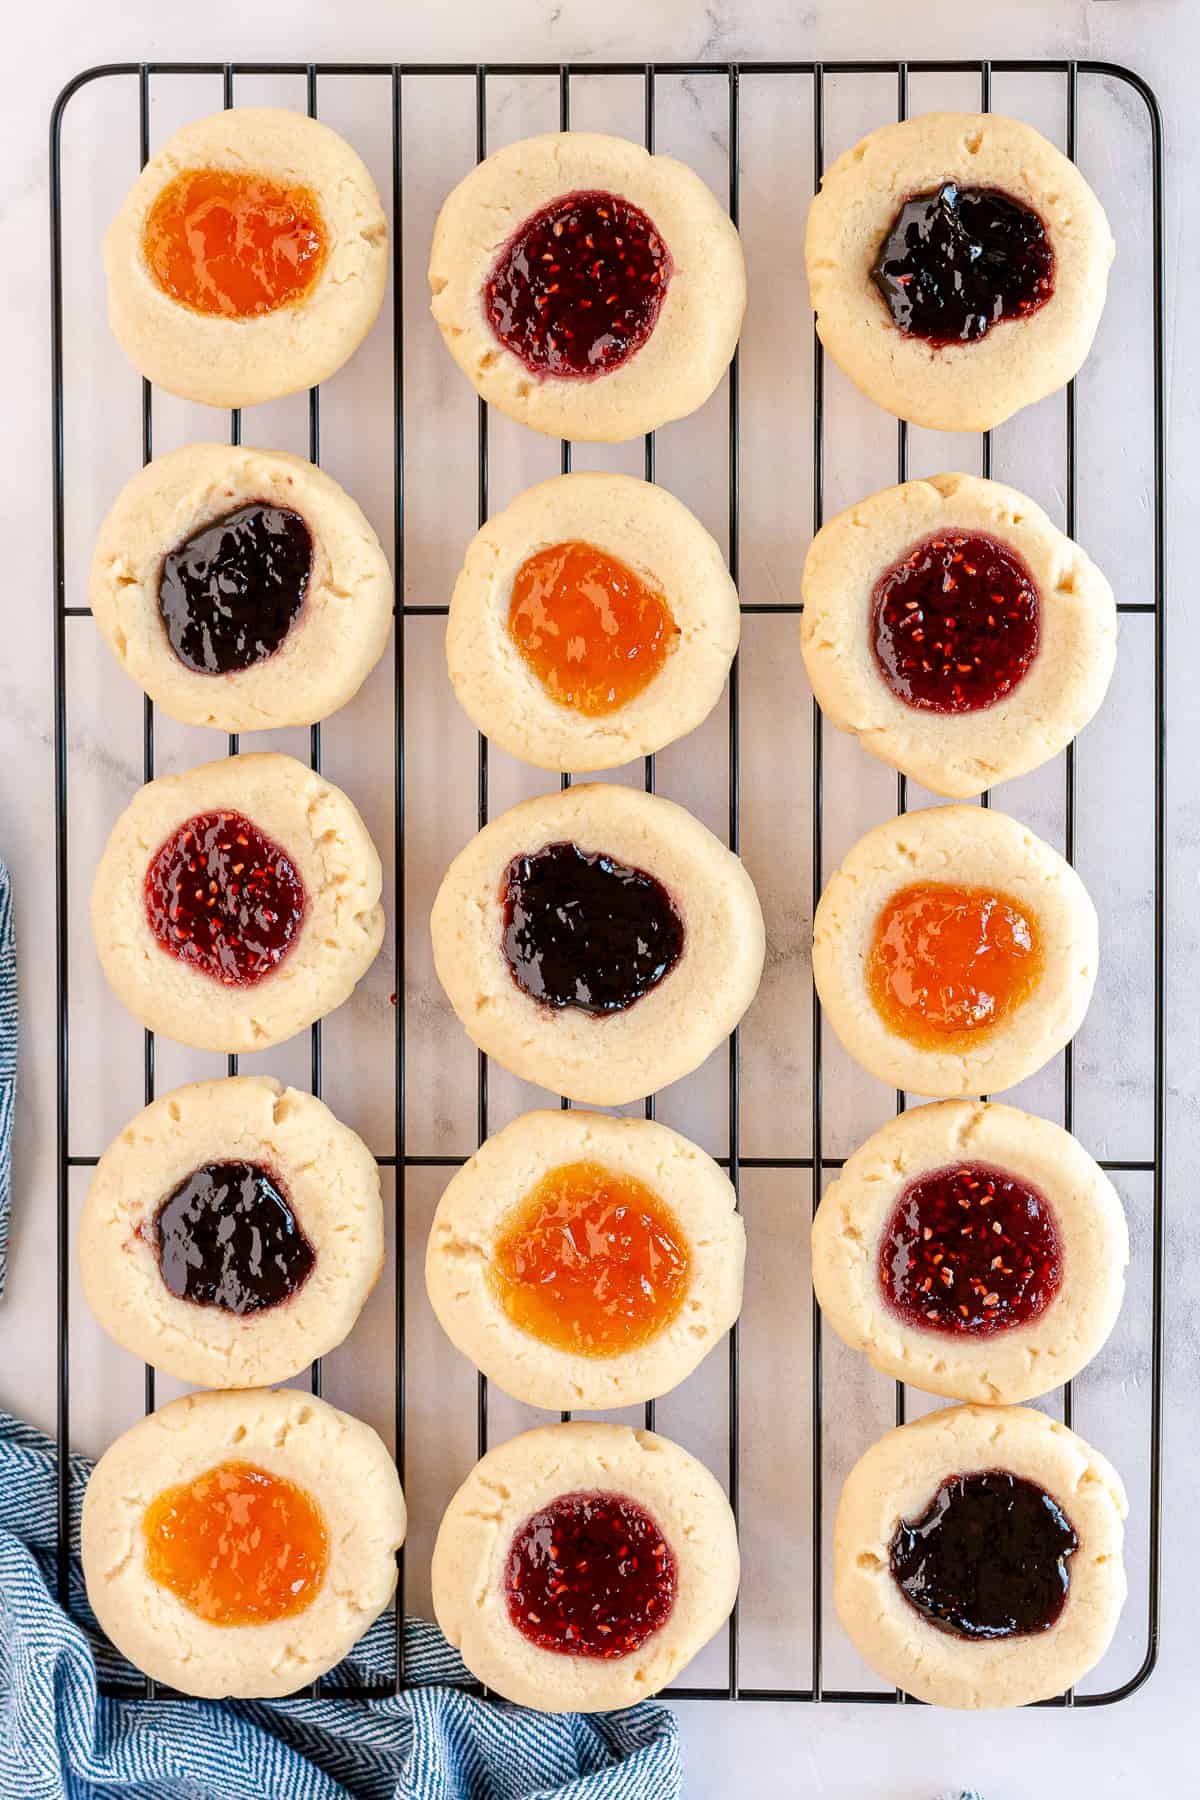 Jam filled thumbprint cookies cooling on a wire rack.